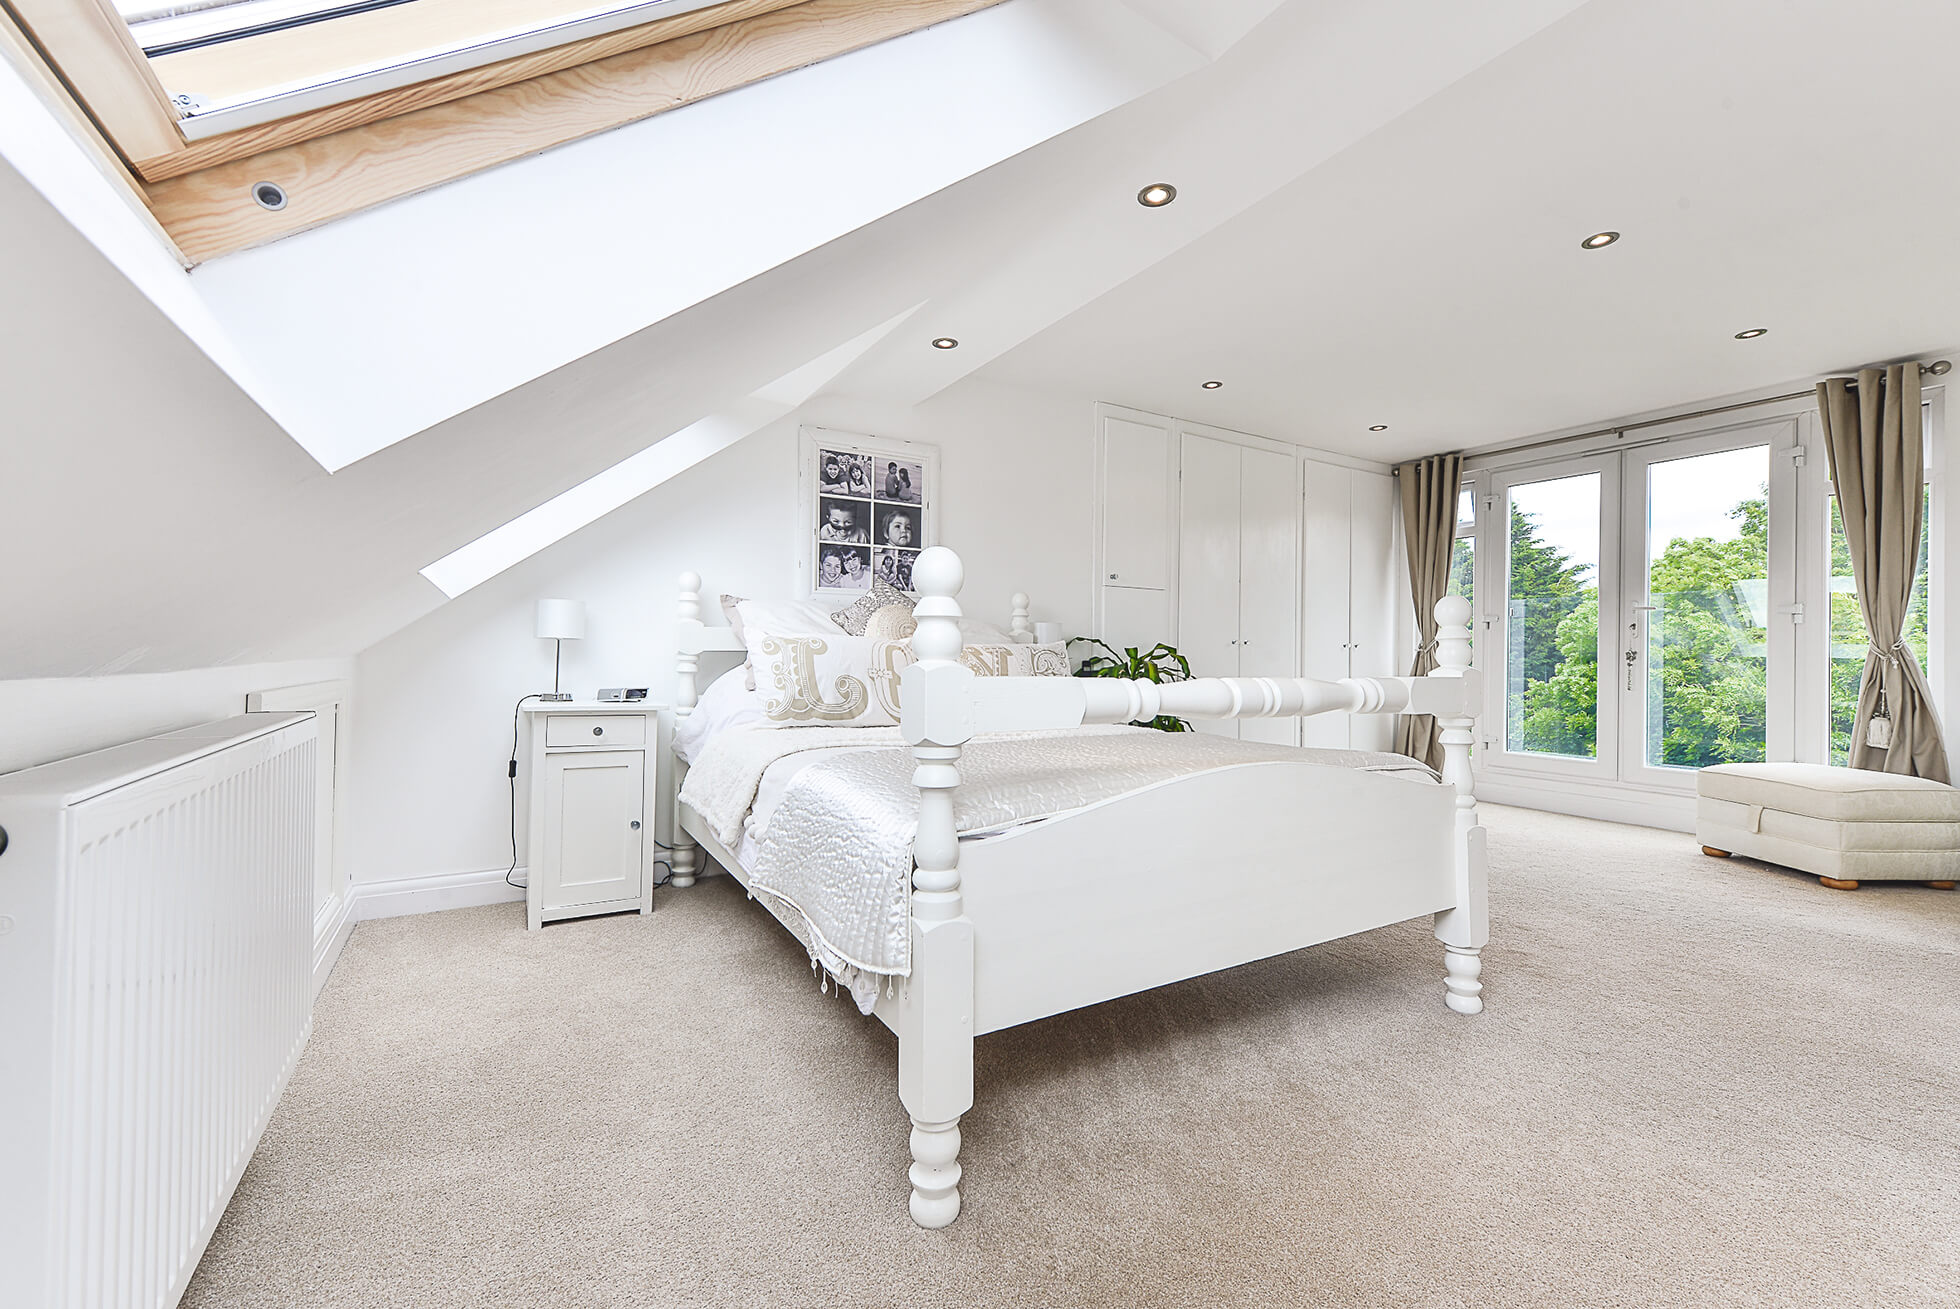 Do you have a question about converting your Loft in Much Hadham? Here are the most popular questions asked by our clients.